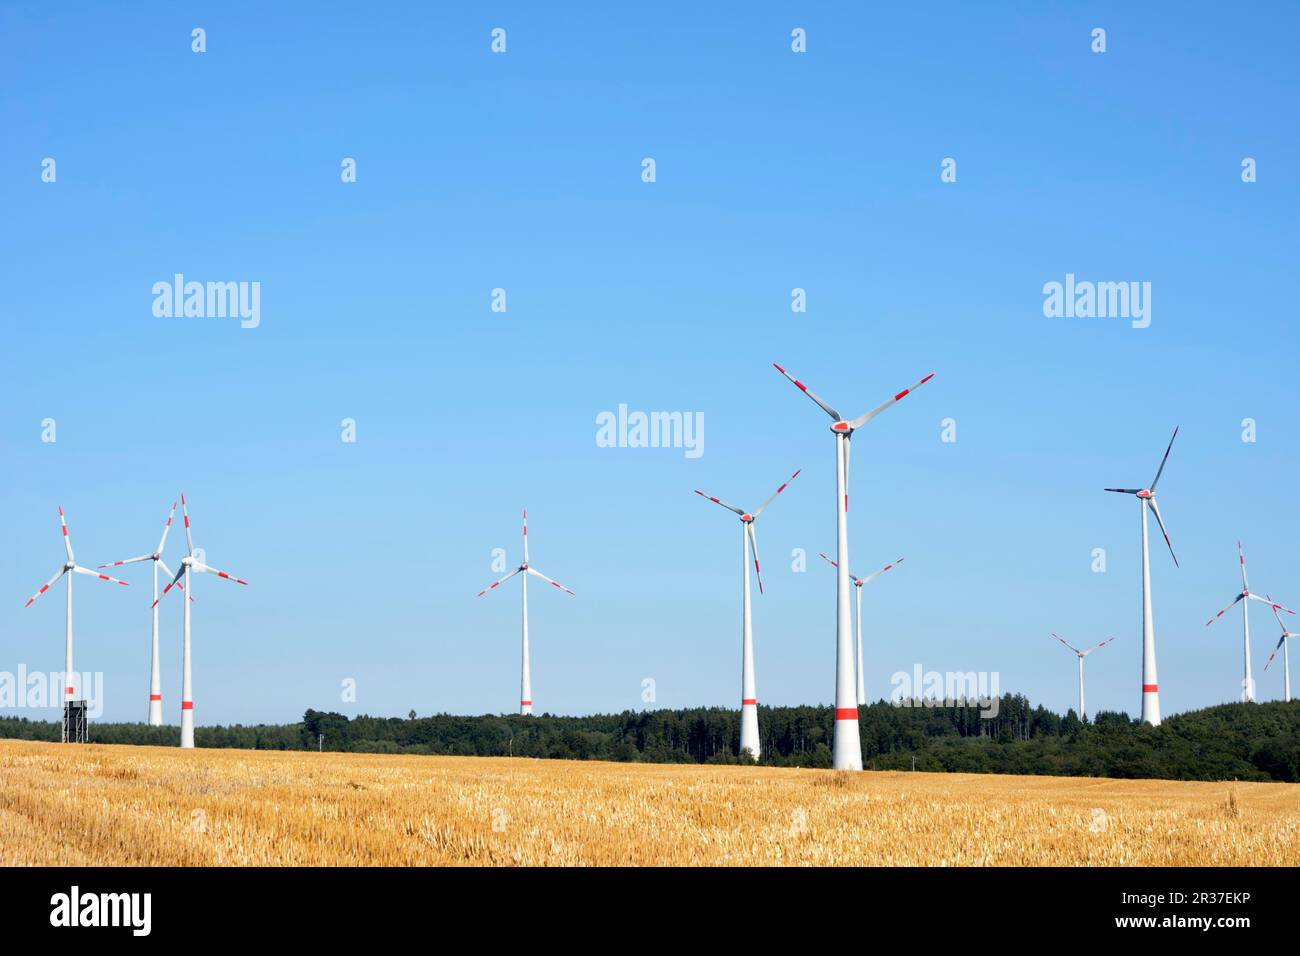 Alternative enegy creation with wind power Stock Photo